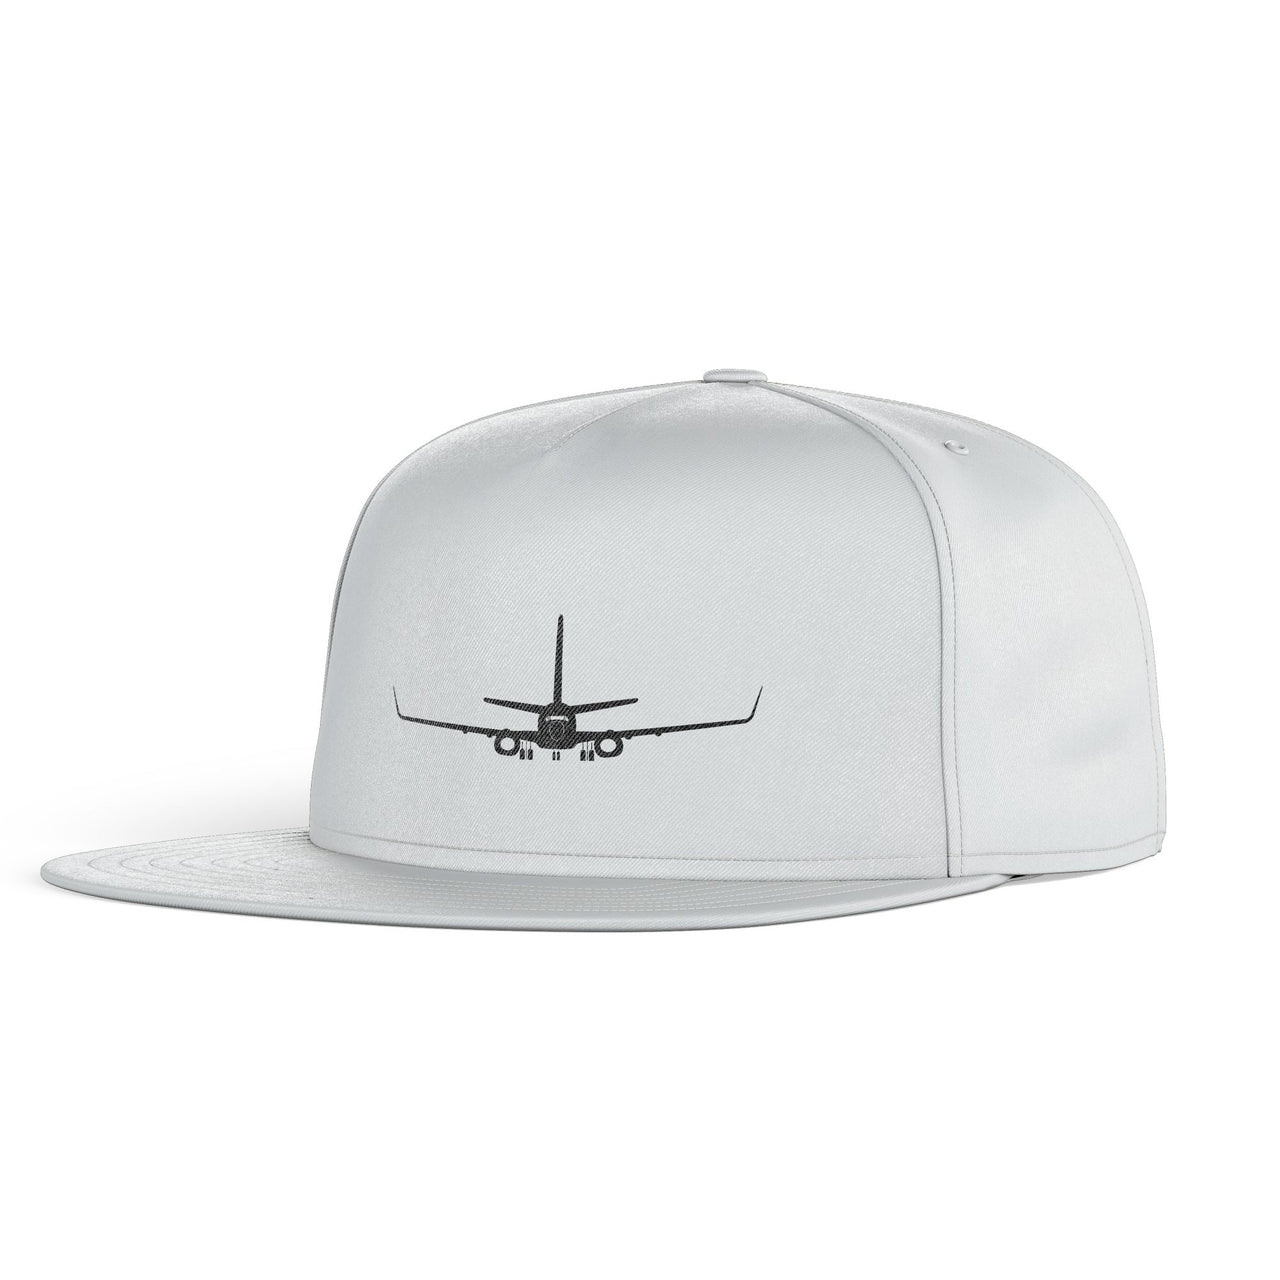 Boeing 737-800NG Silhouette Designed Snapback Caps & Hats